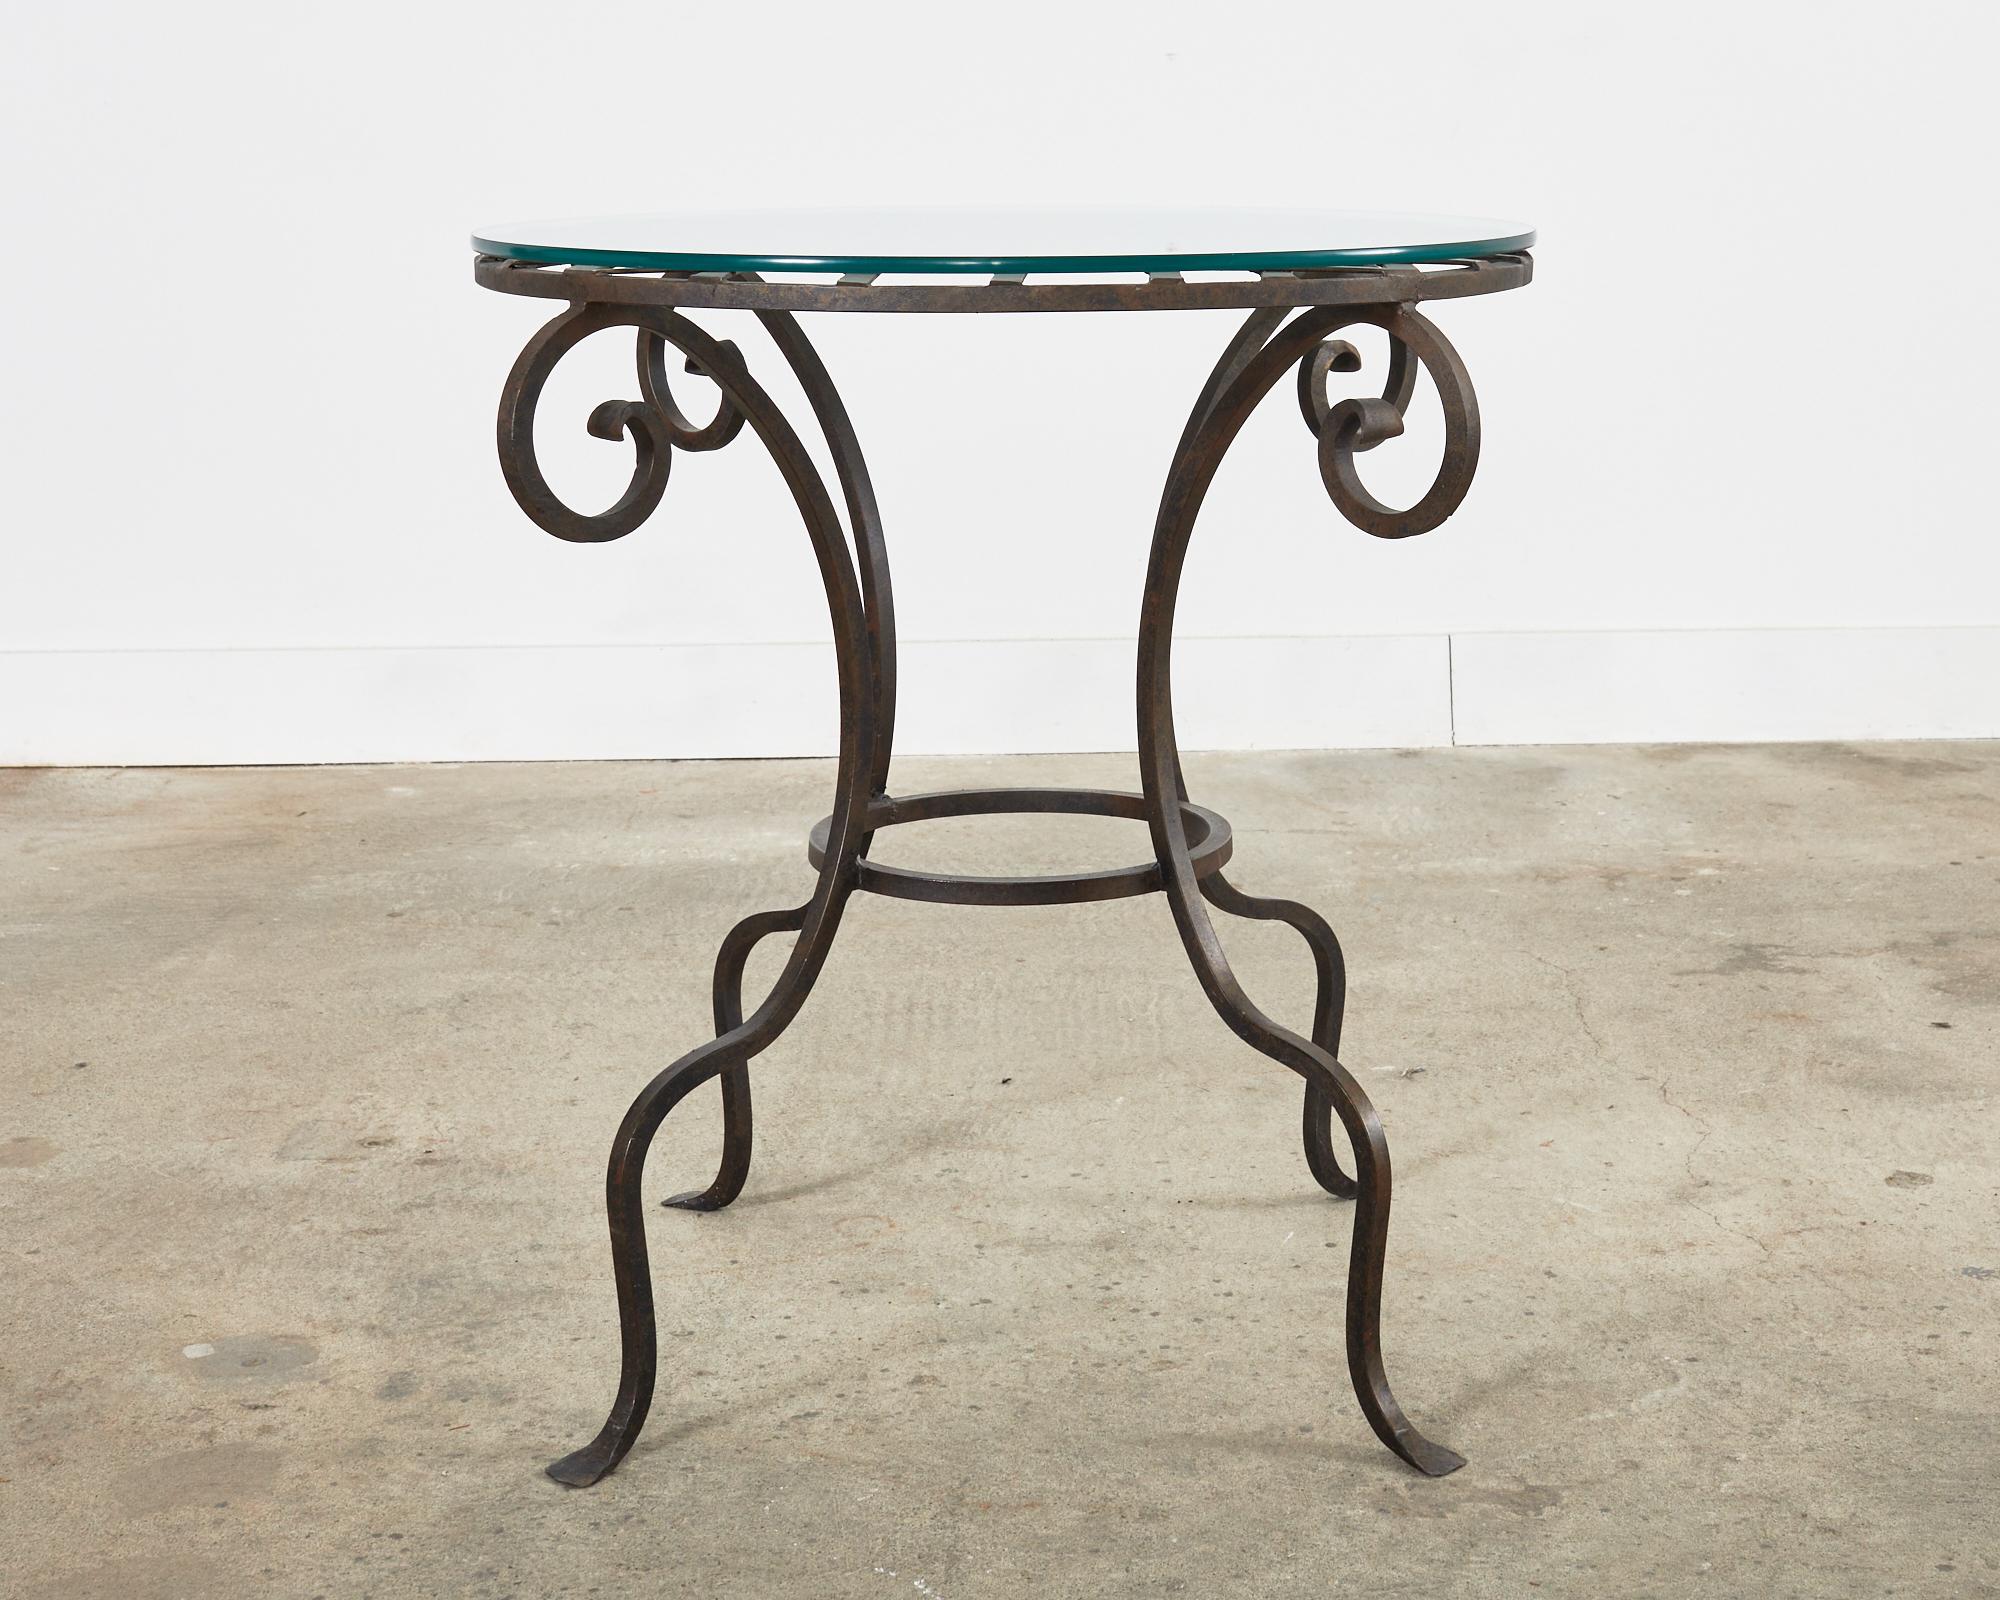 Neoclassical Rose Tarlow Style Wrought Iron Patio Garden Dining Table For Sale